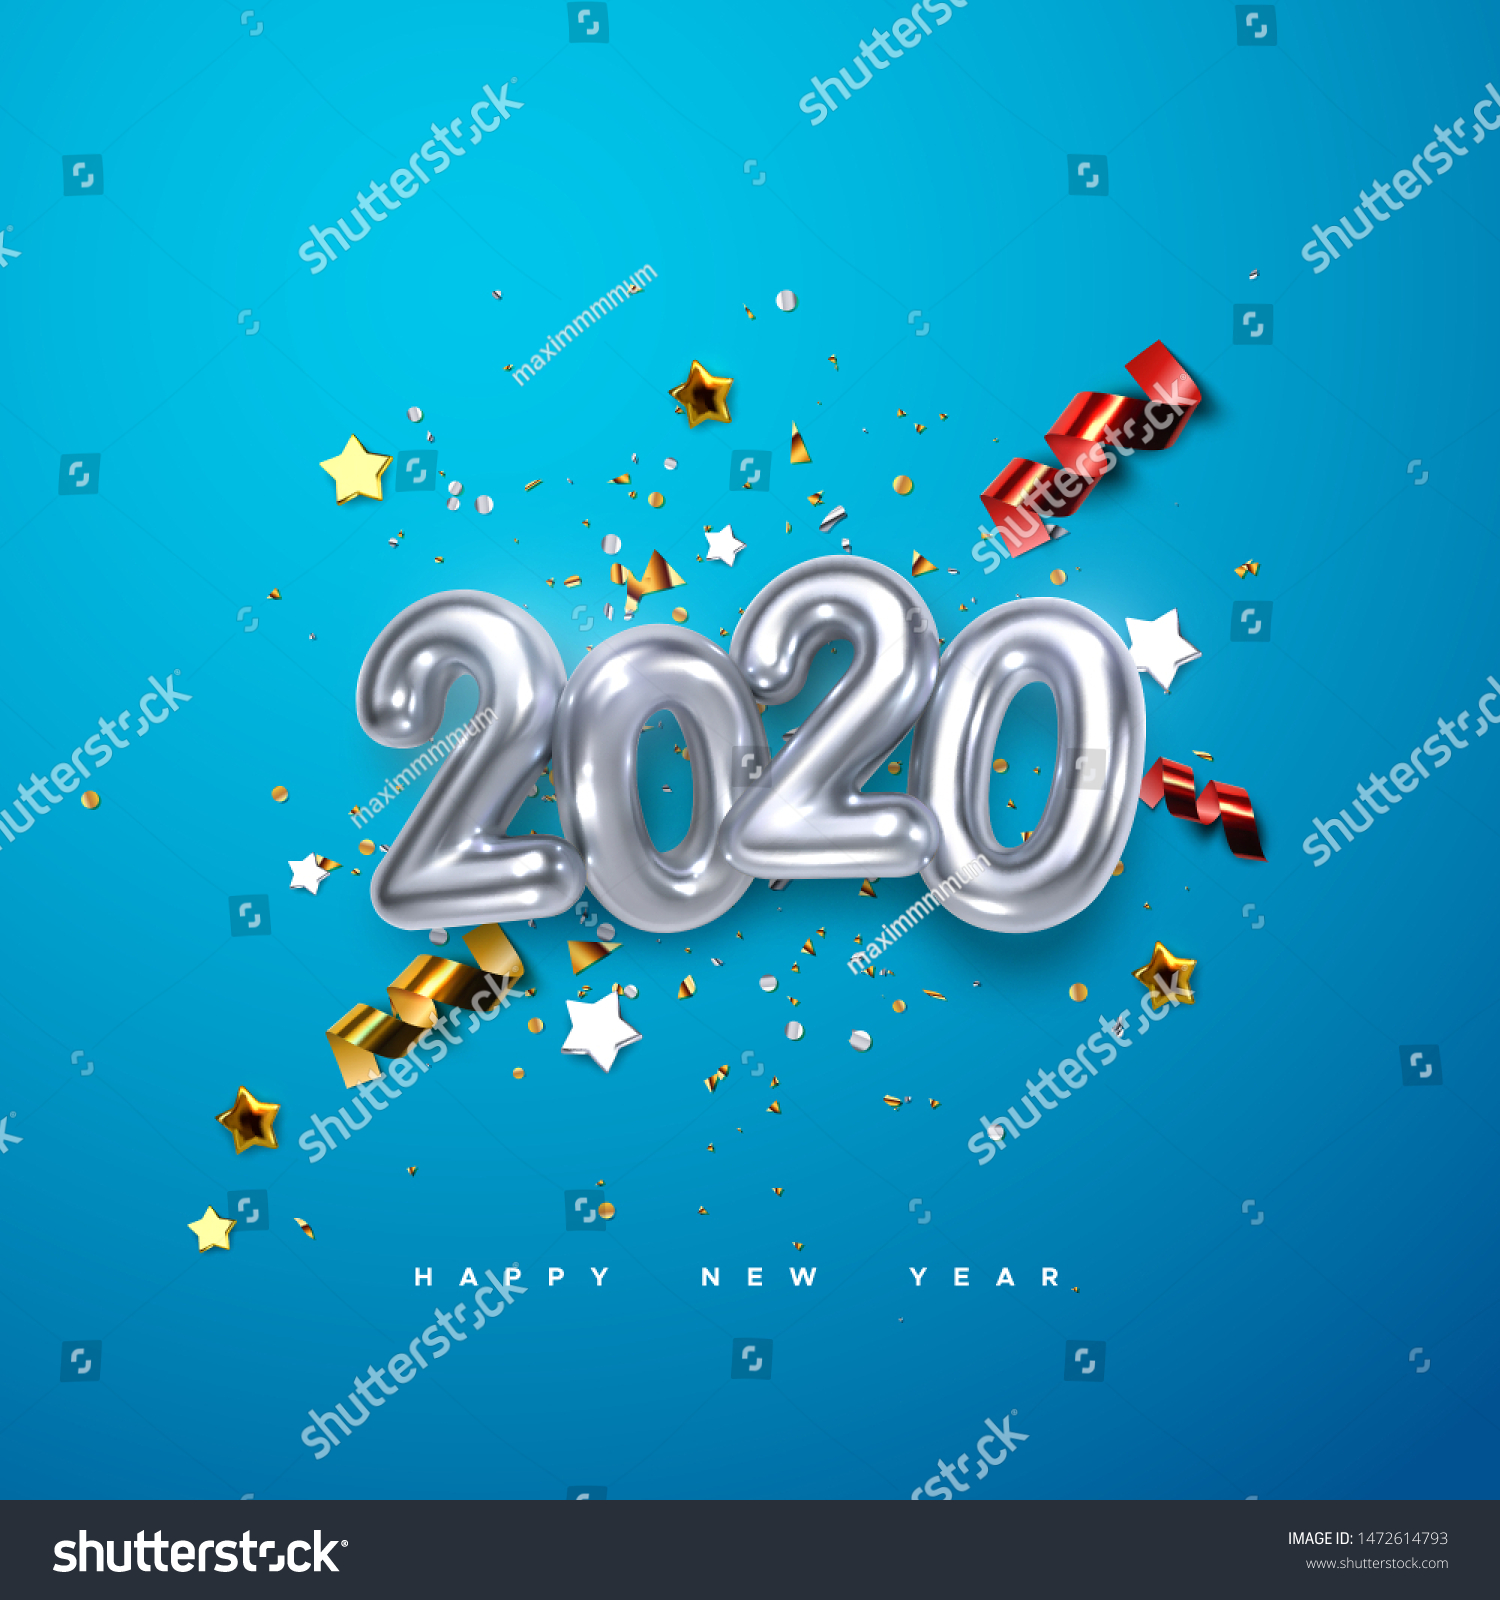 Realistic 2020 silver numbers and festive confetti, stars and streamer ribbons on blue background. Vector holiday illustration. Happy New 2020 Year. New year ornament. Decoration element with tinsel #1472614793